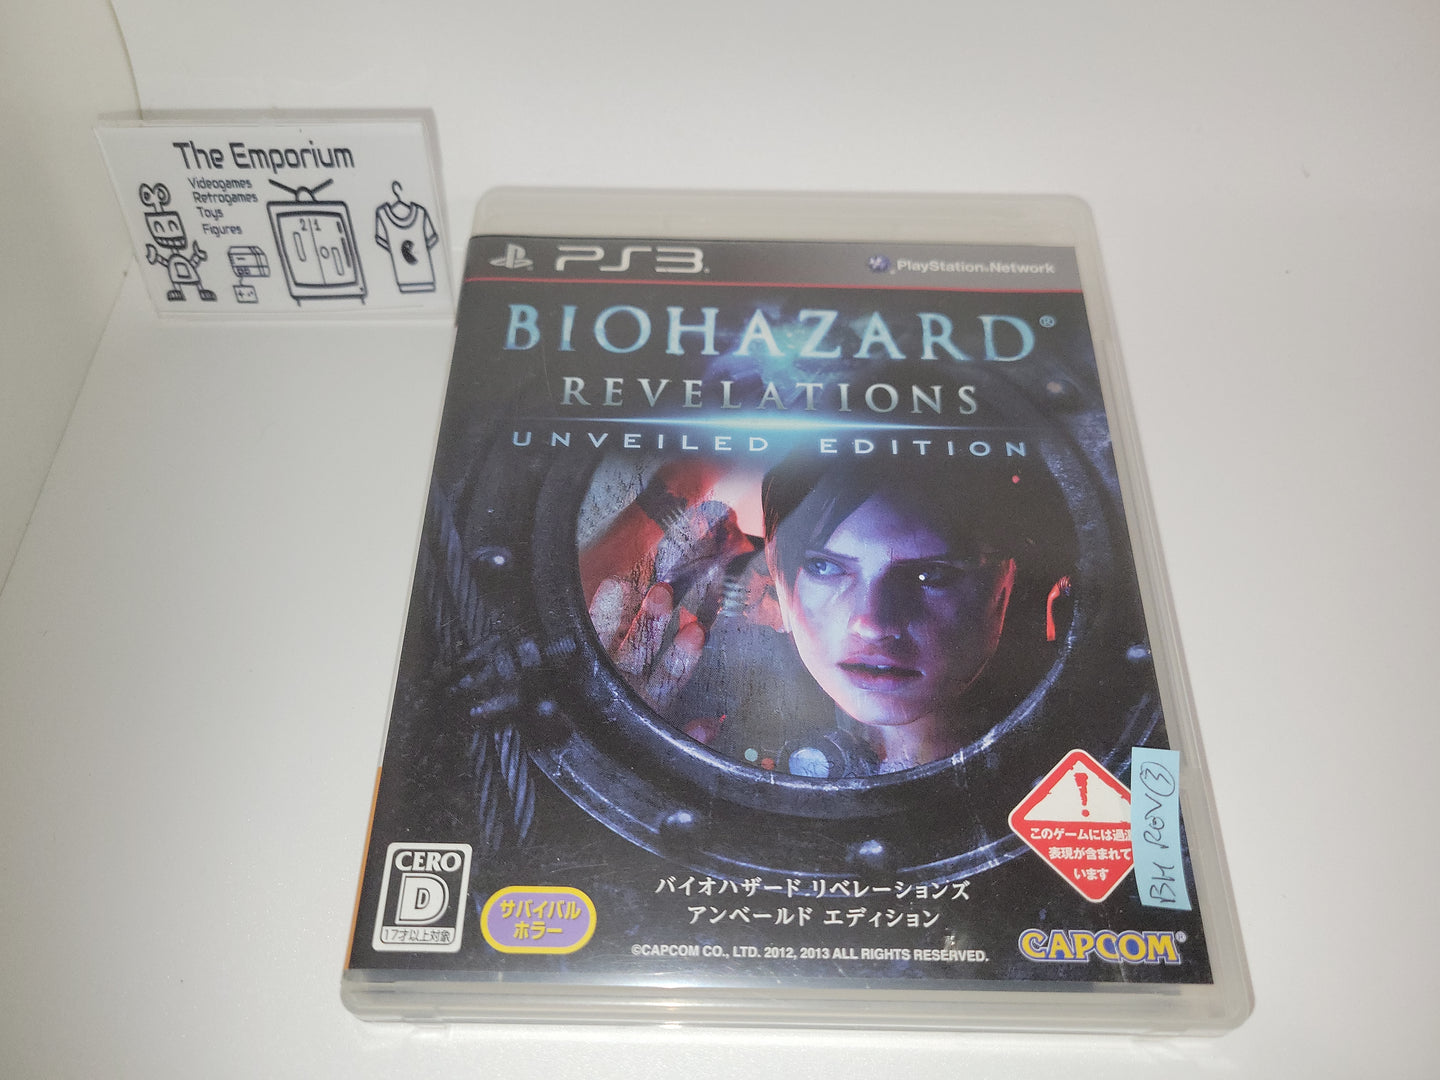 BioHazard Revelations Unveiled Edition - Sony PS3 Playstation 3